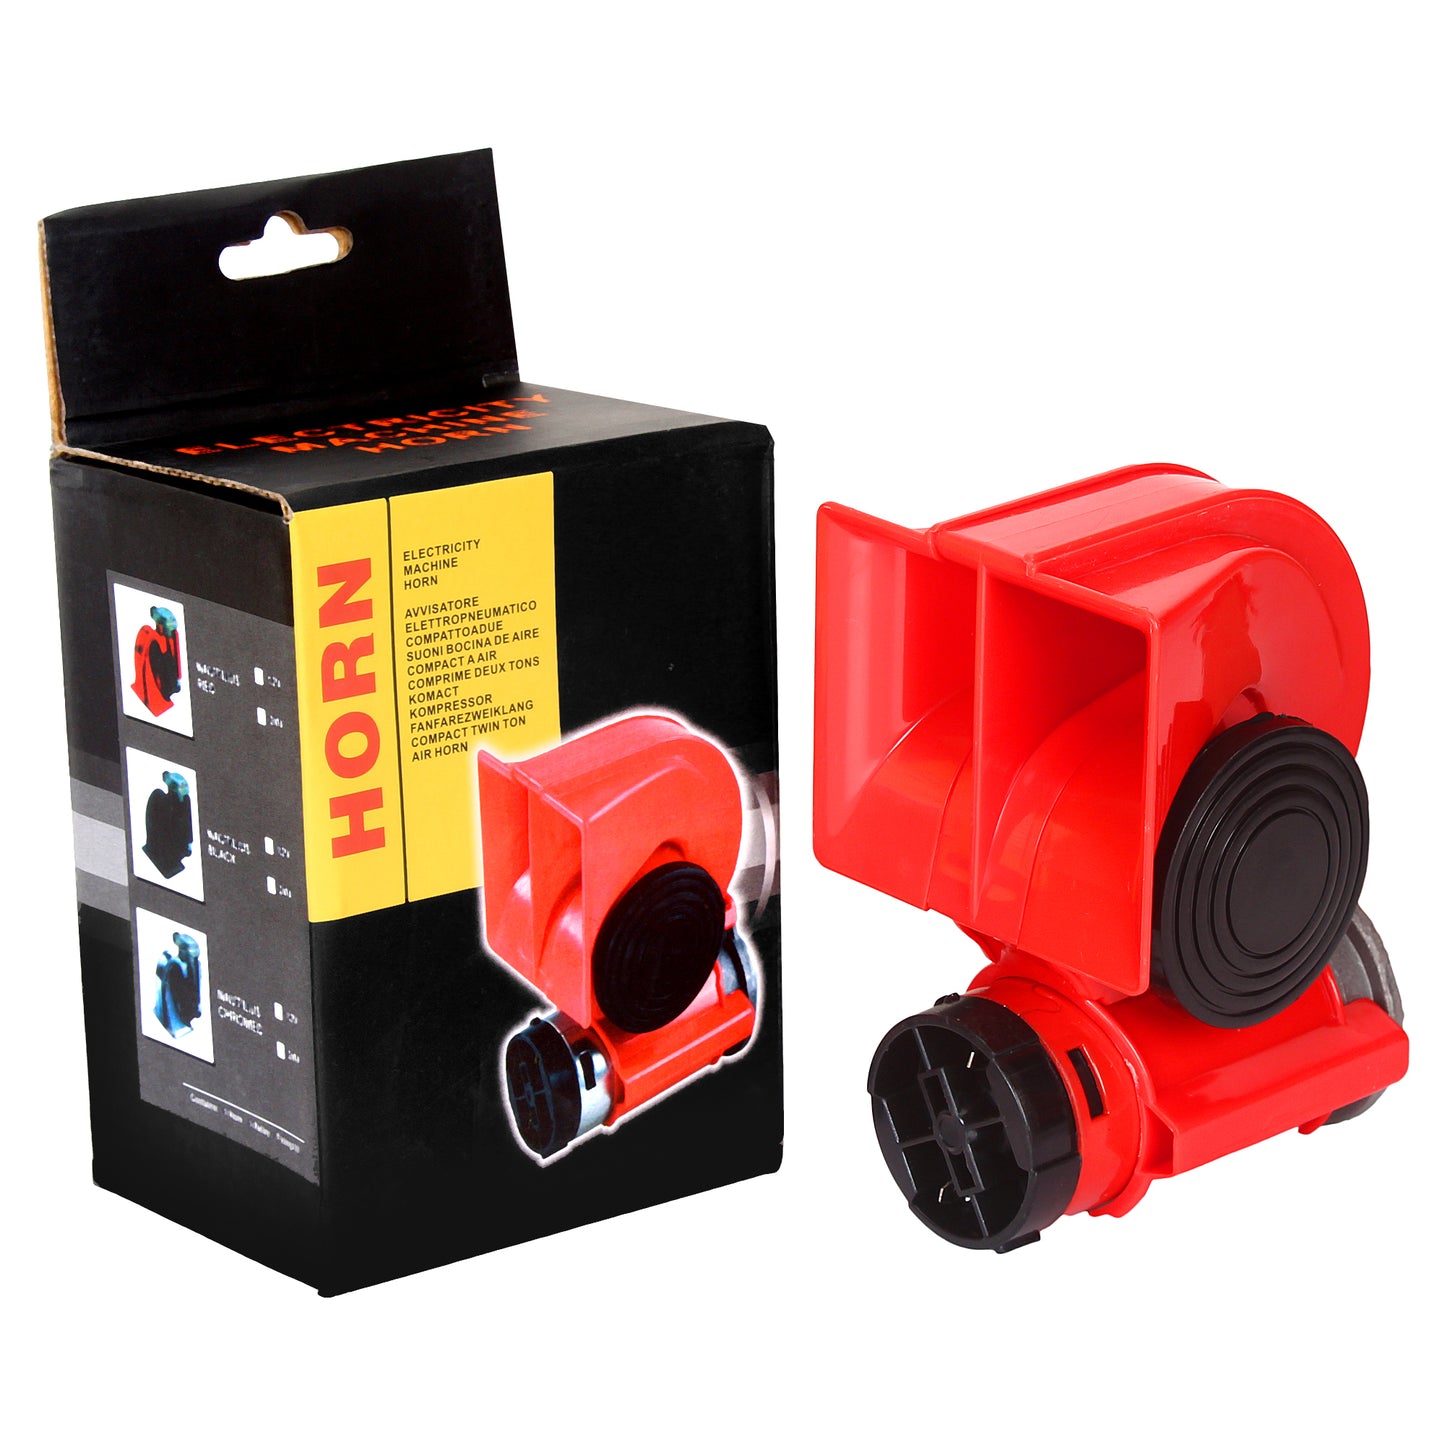 Oshotto Nautilus Twin Air Horn Universal for Cars, Trucks, Boats, ATVS, Motorcycles and Scooters